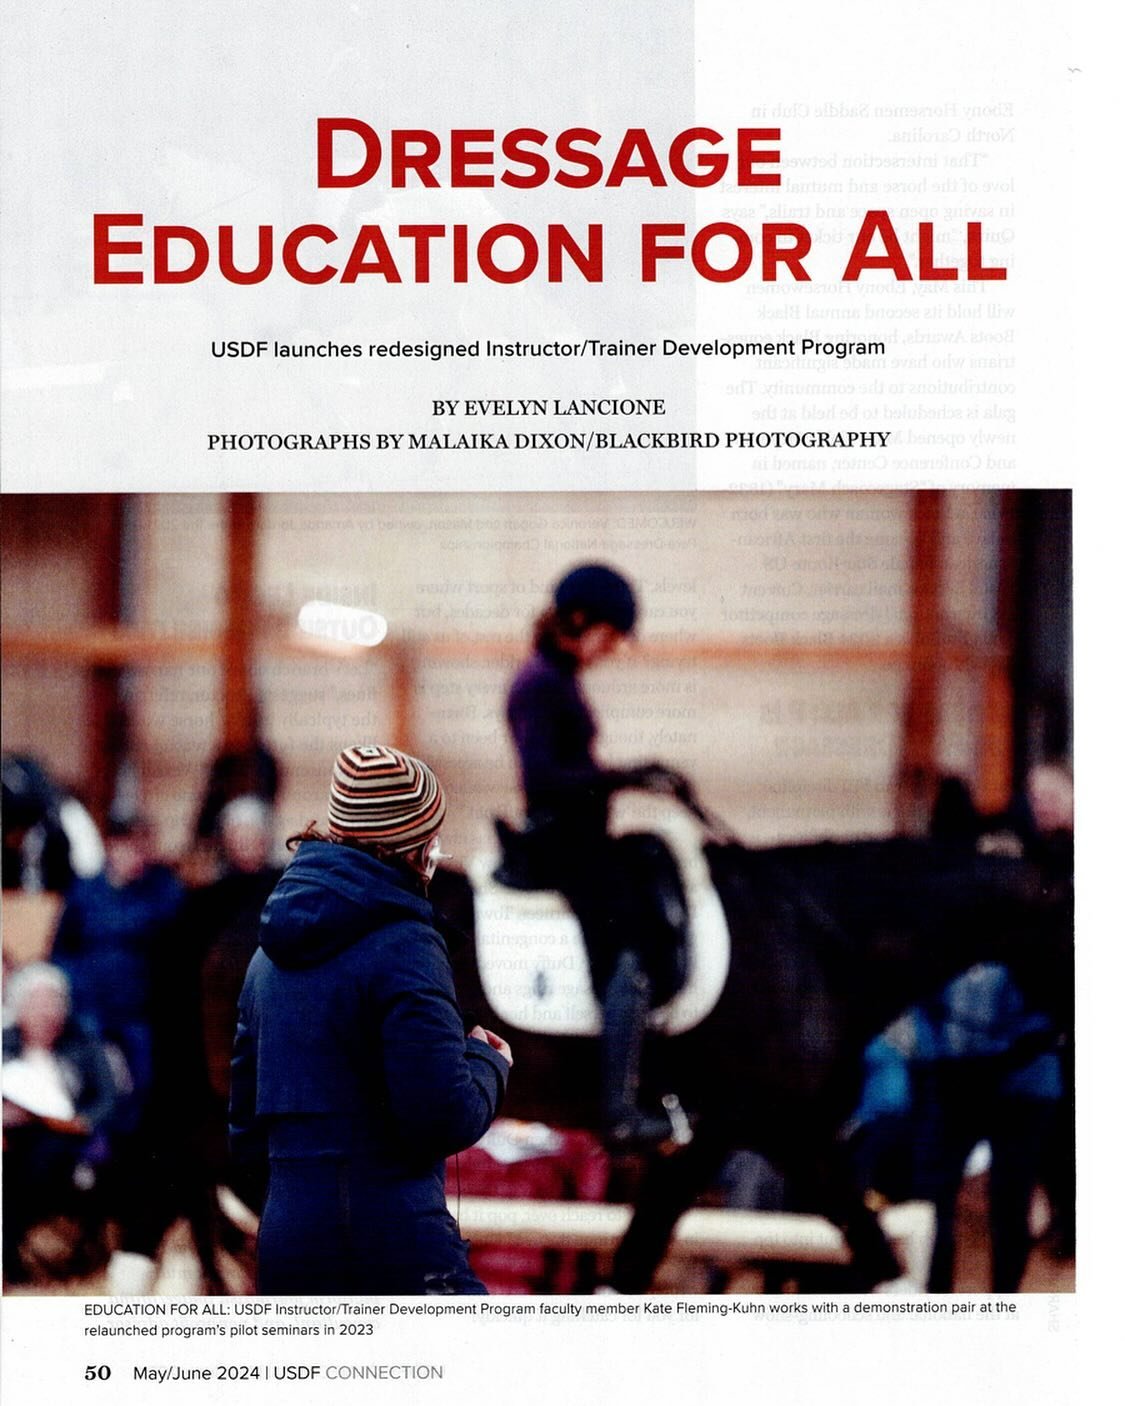 Pretty cool to have UT dressage make the @usdfofficial Connection Magazine! It was great hosting the inaugural event, as USDF re-envisions the Instructor/Trainer program. Bonus we got to learn from top USDF Instructor Faculty members Sarah Geikie &am